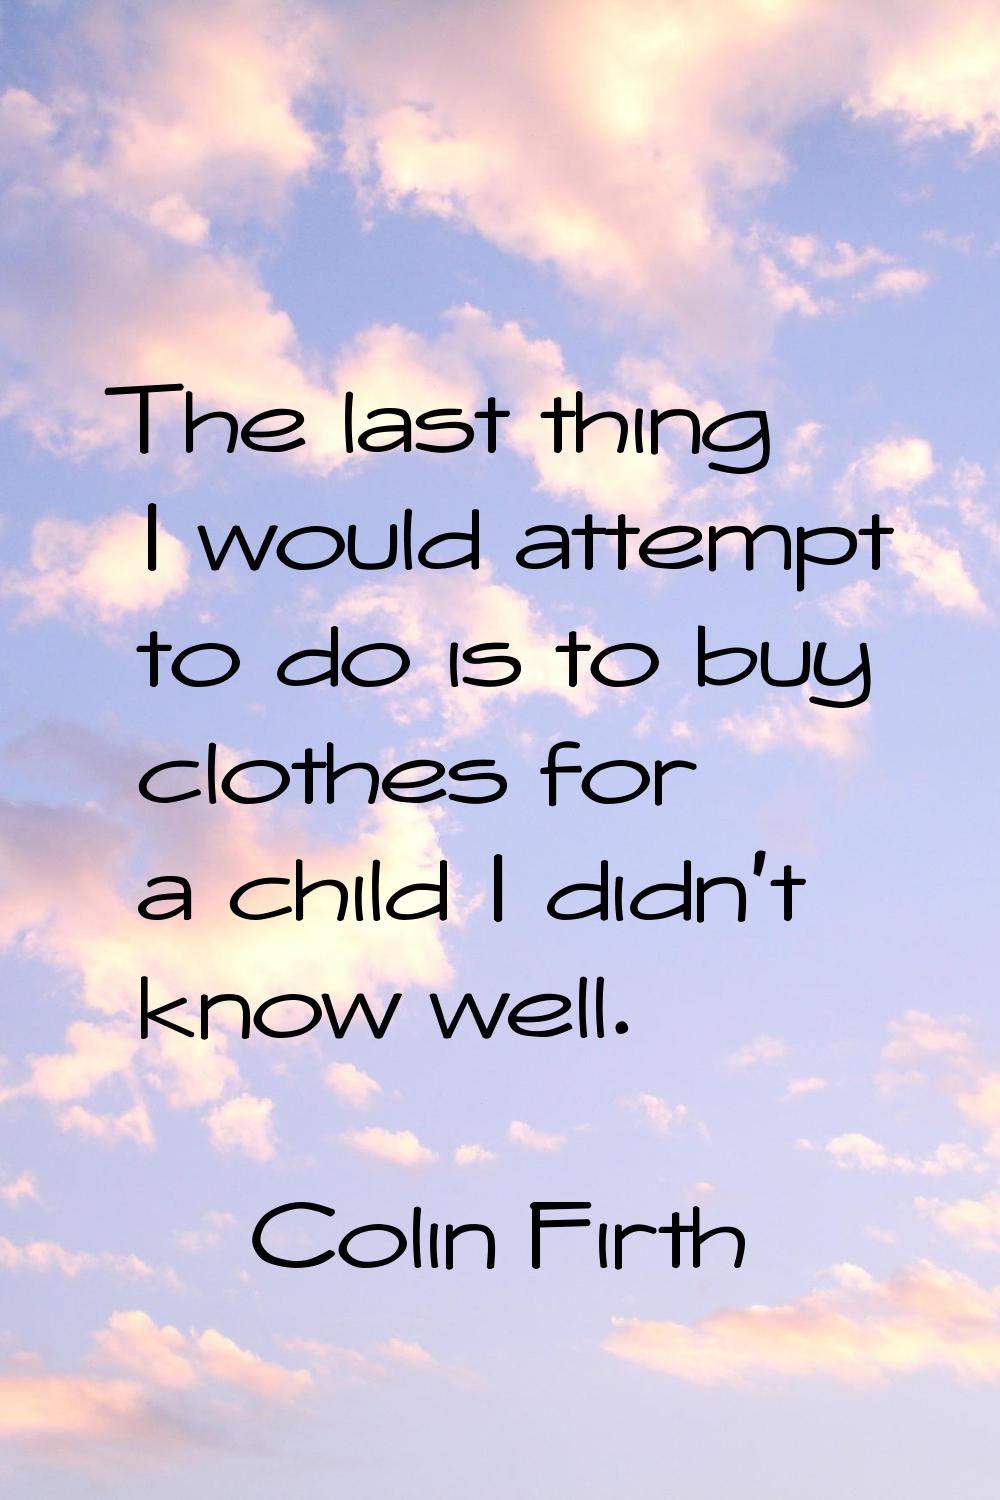 The last thing I would attempt to do is to buy clothes for a child I didn't know well.